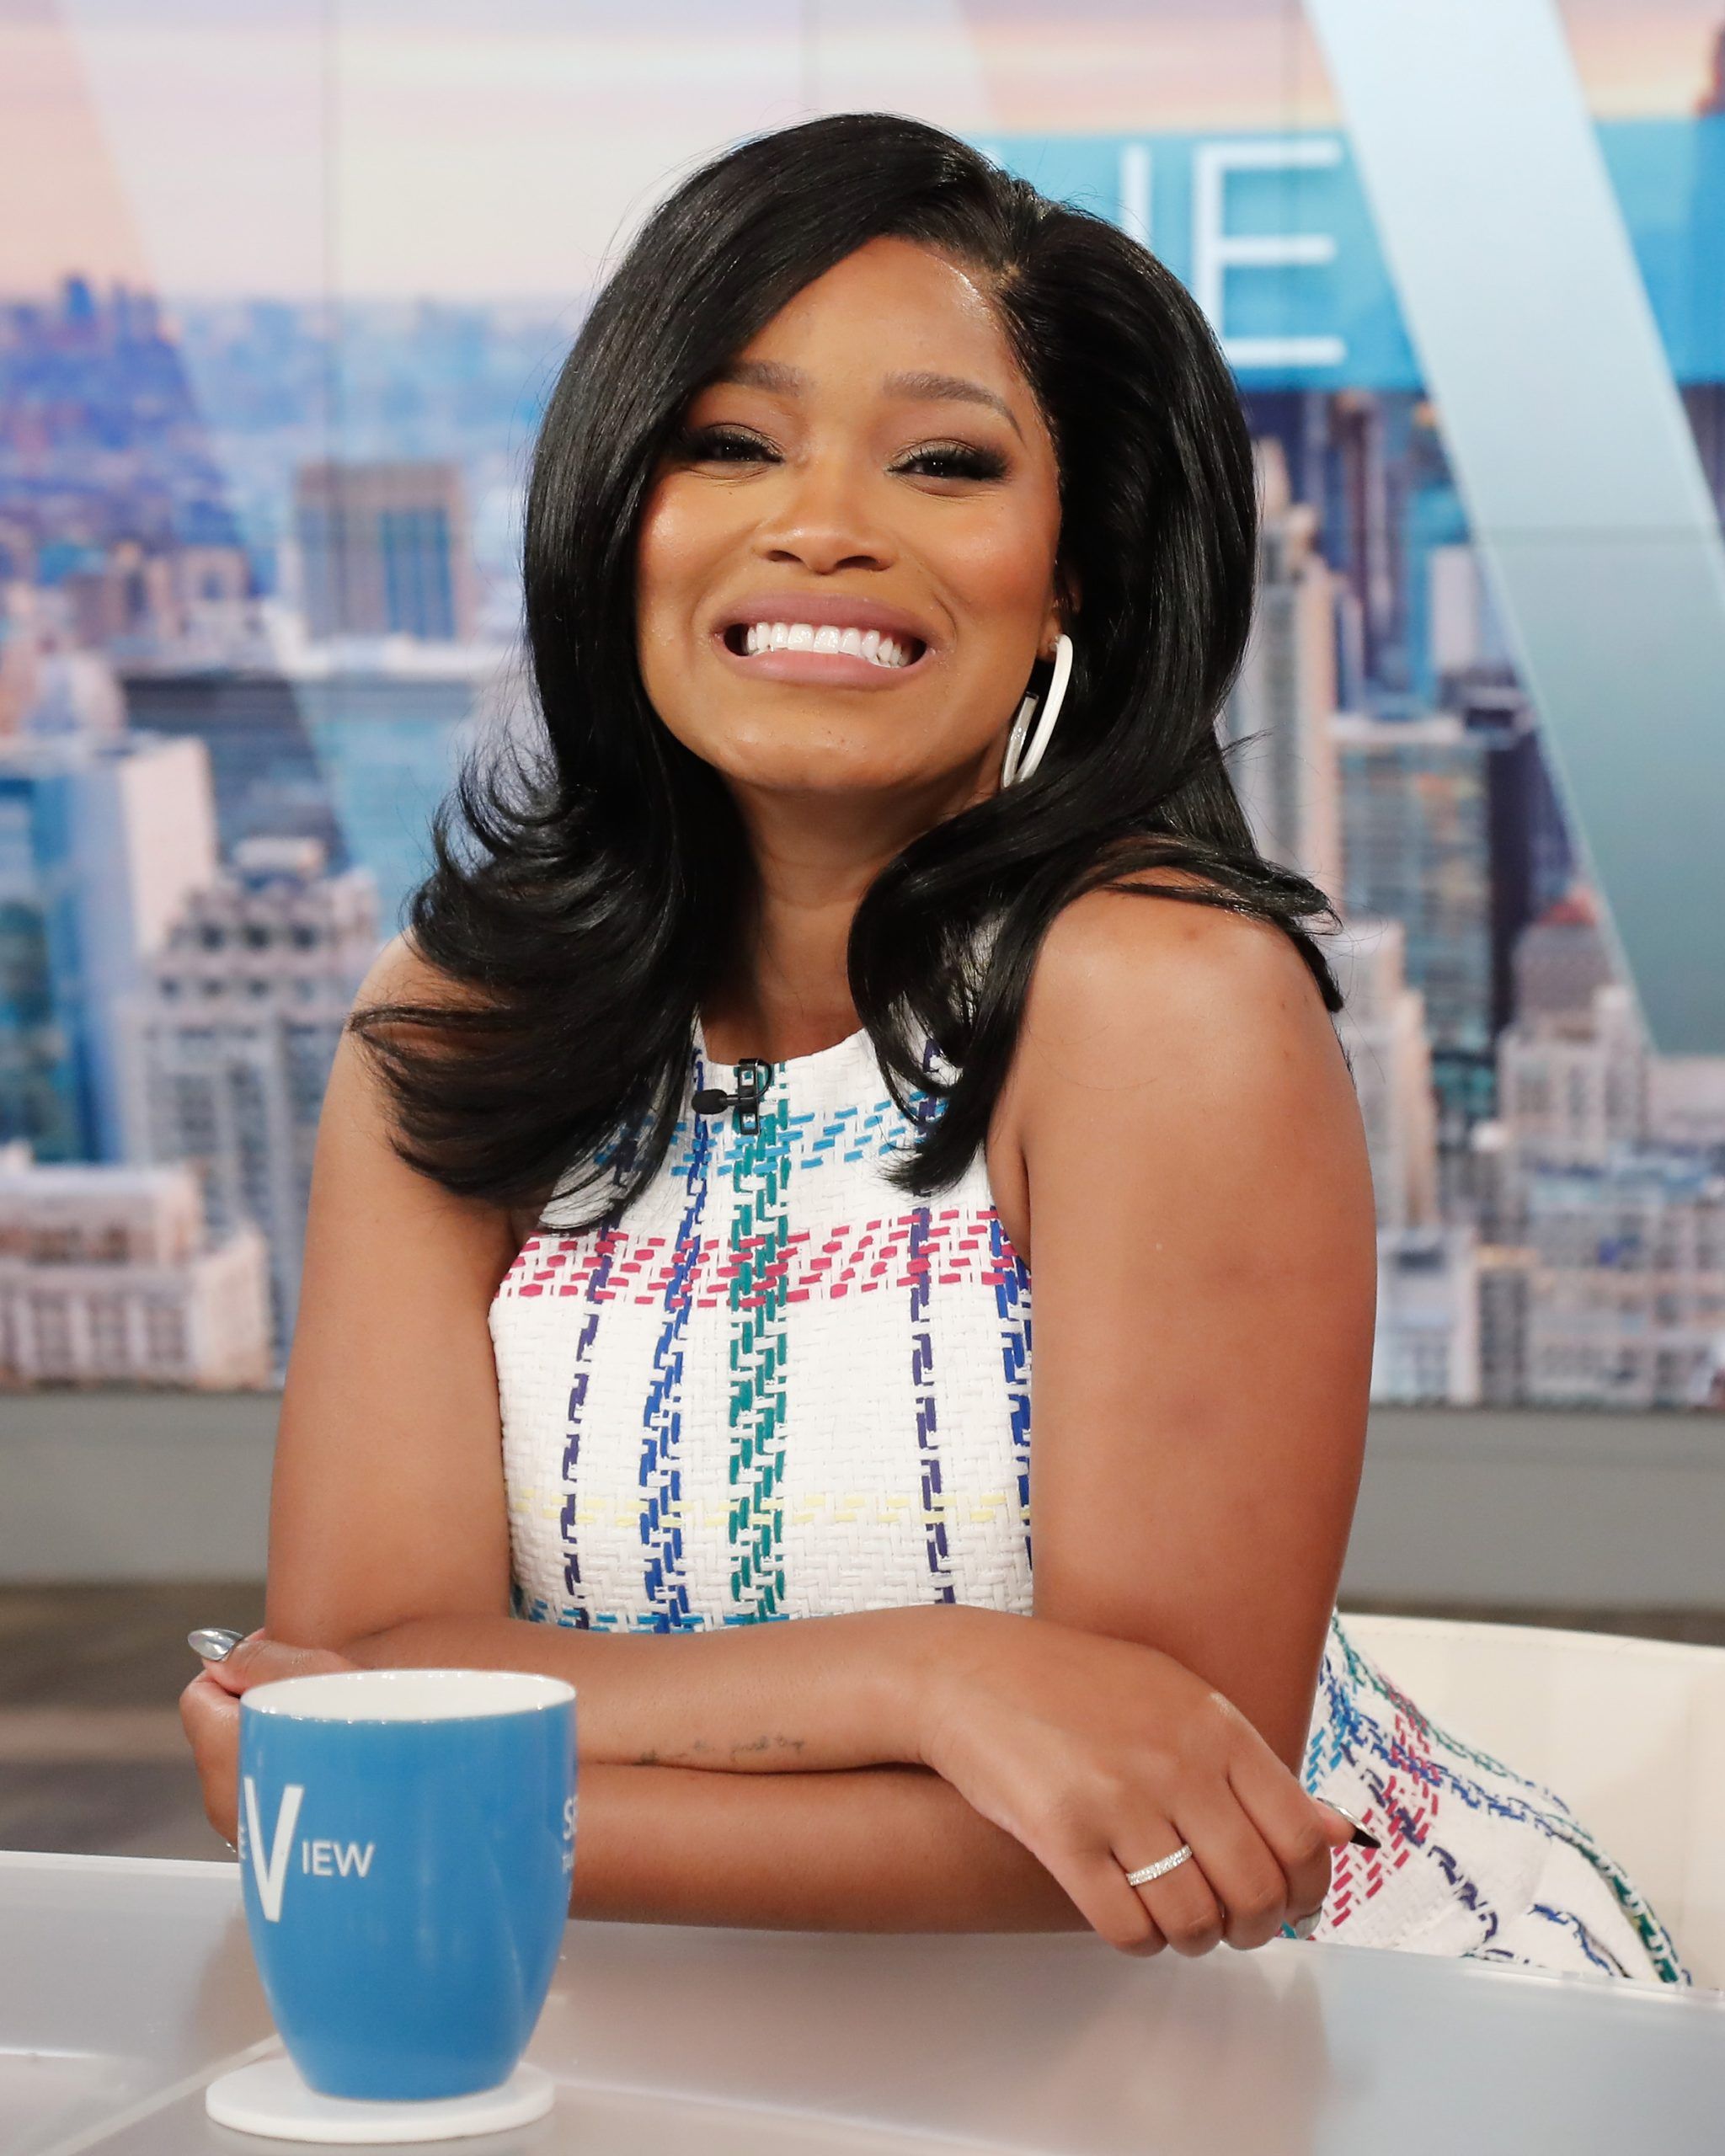 In Case You Missed It: KeKe Palmer On ‘The View’